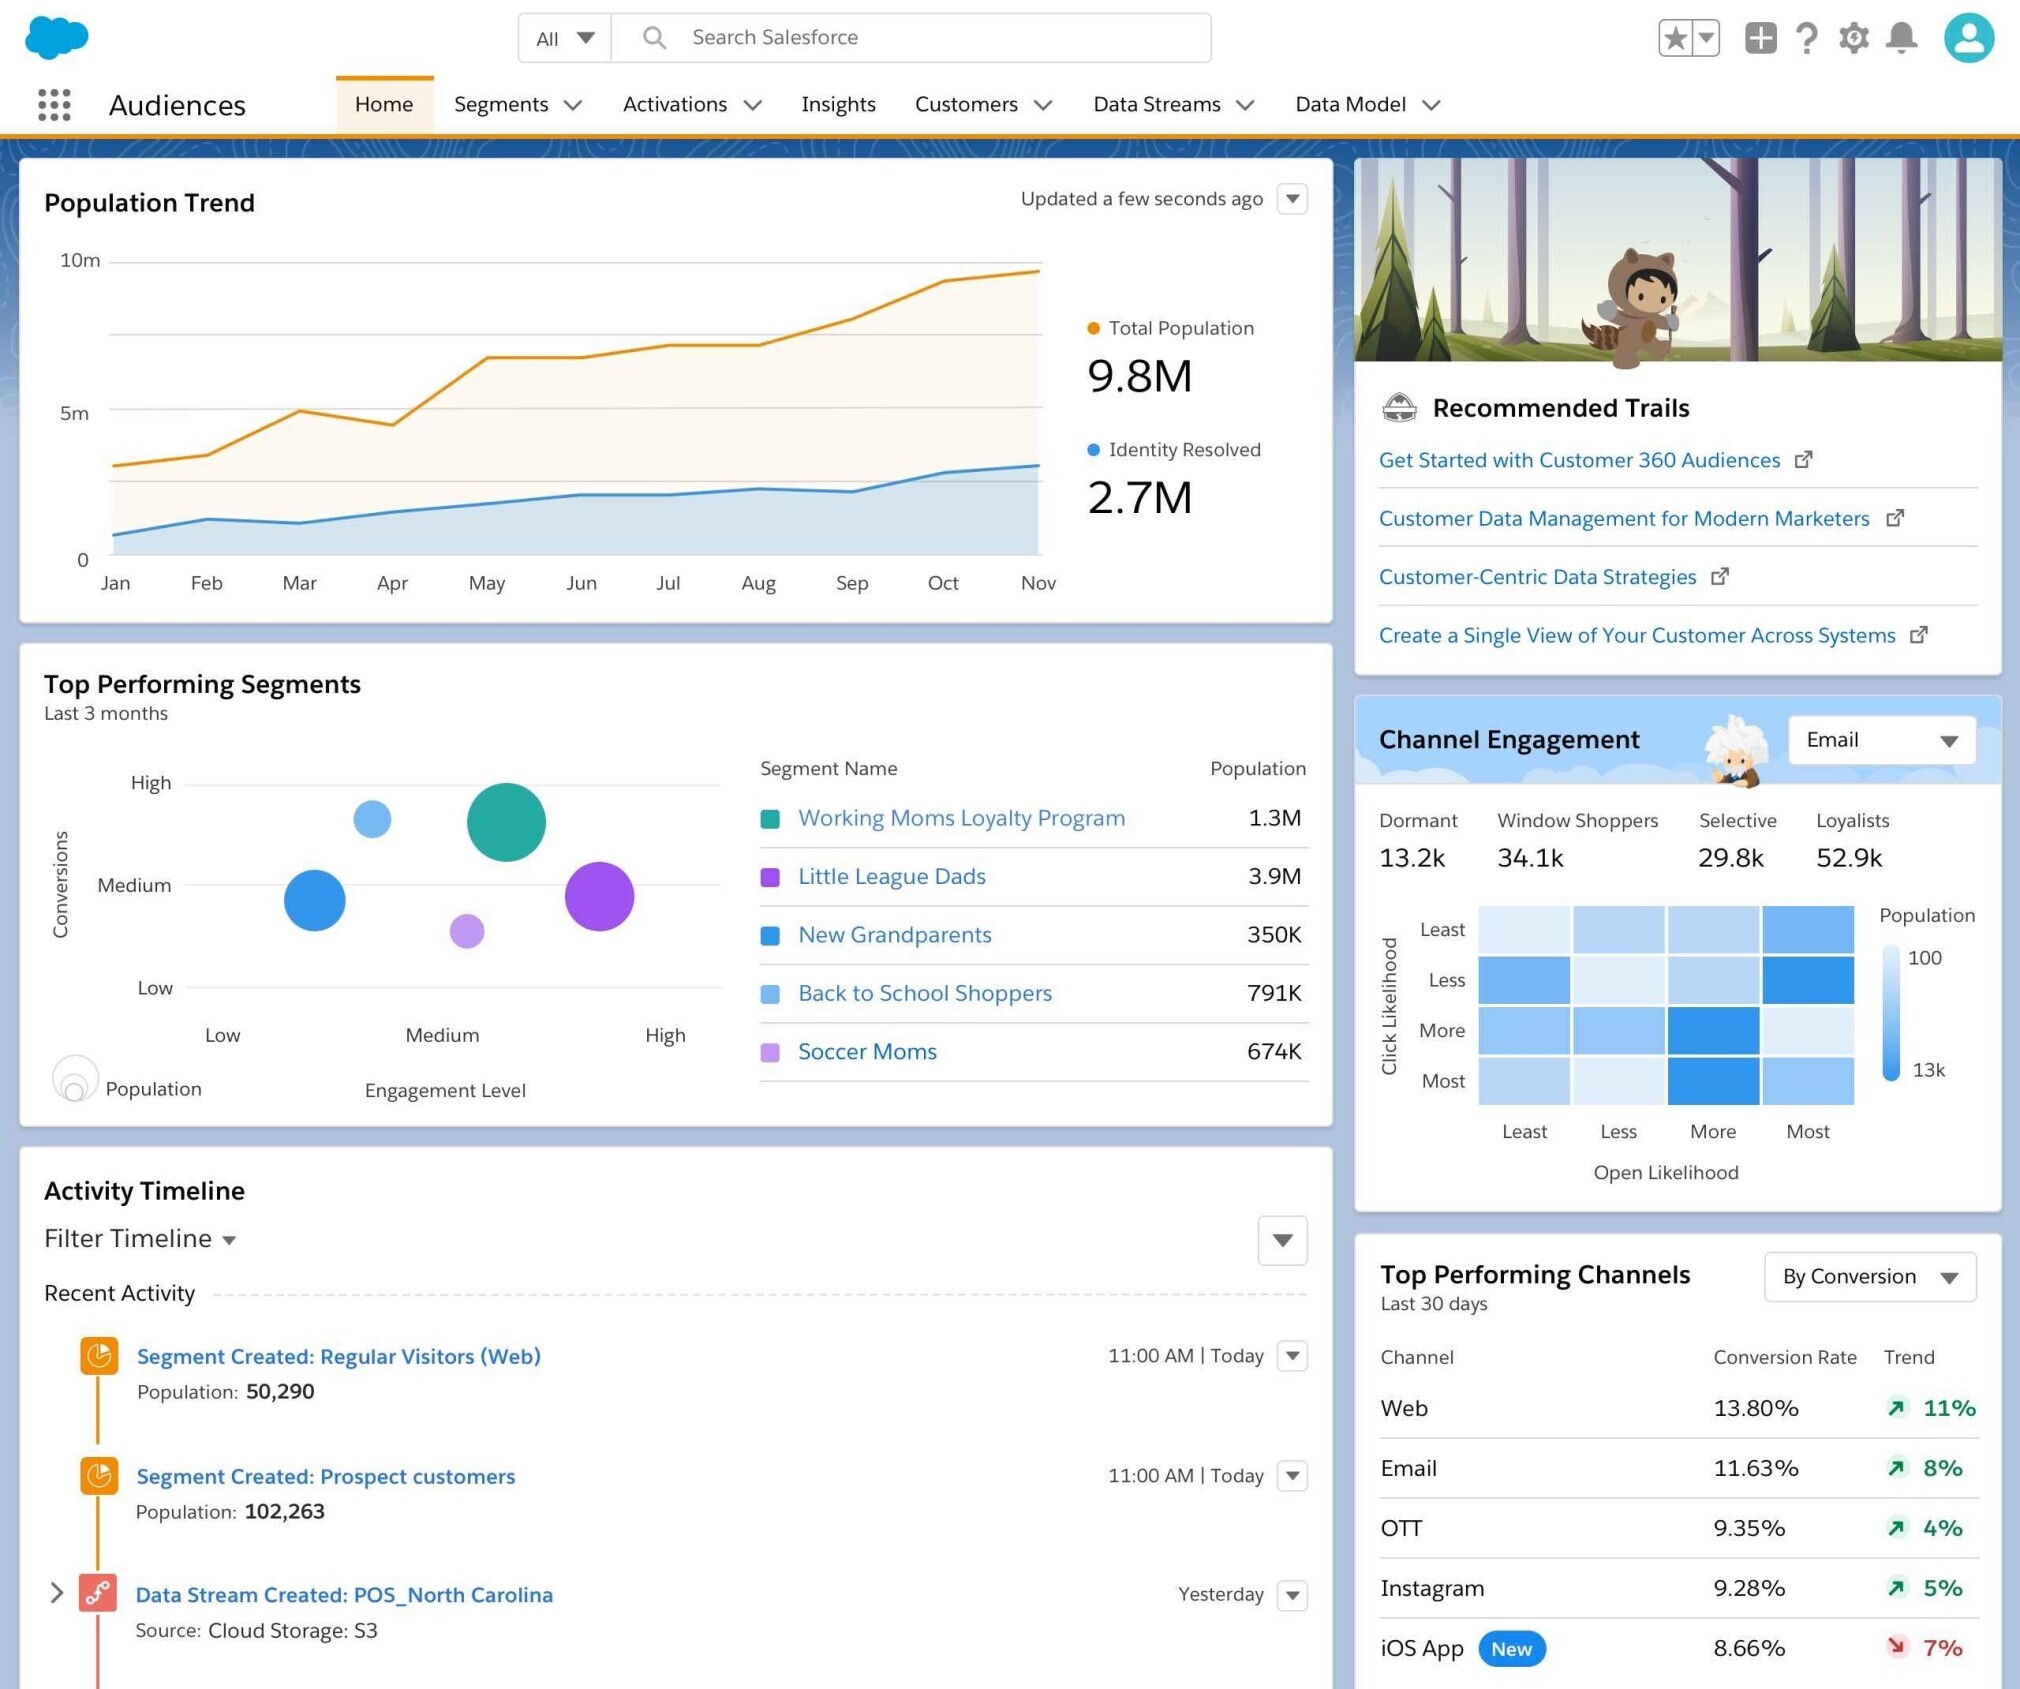 Salesforce Customer 360 CRM provides access to sales, service, marketing, commerce, and analytics supports, among many more tools